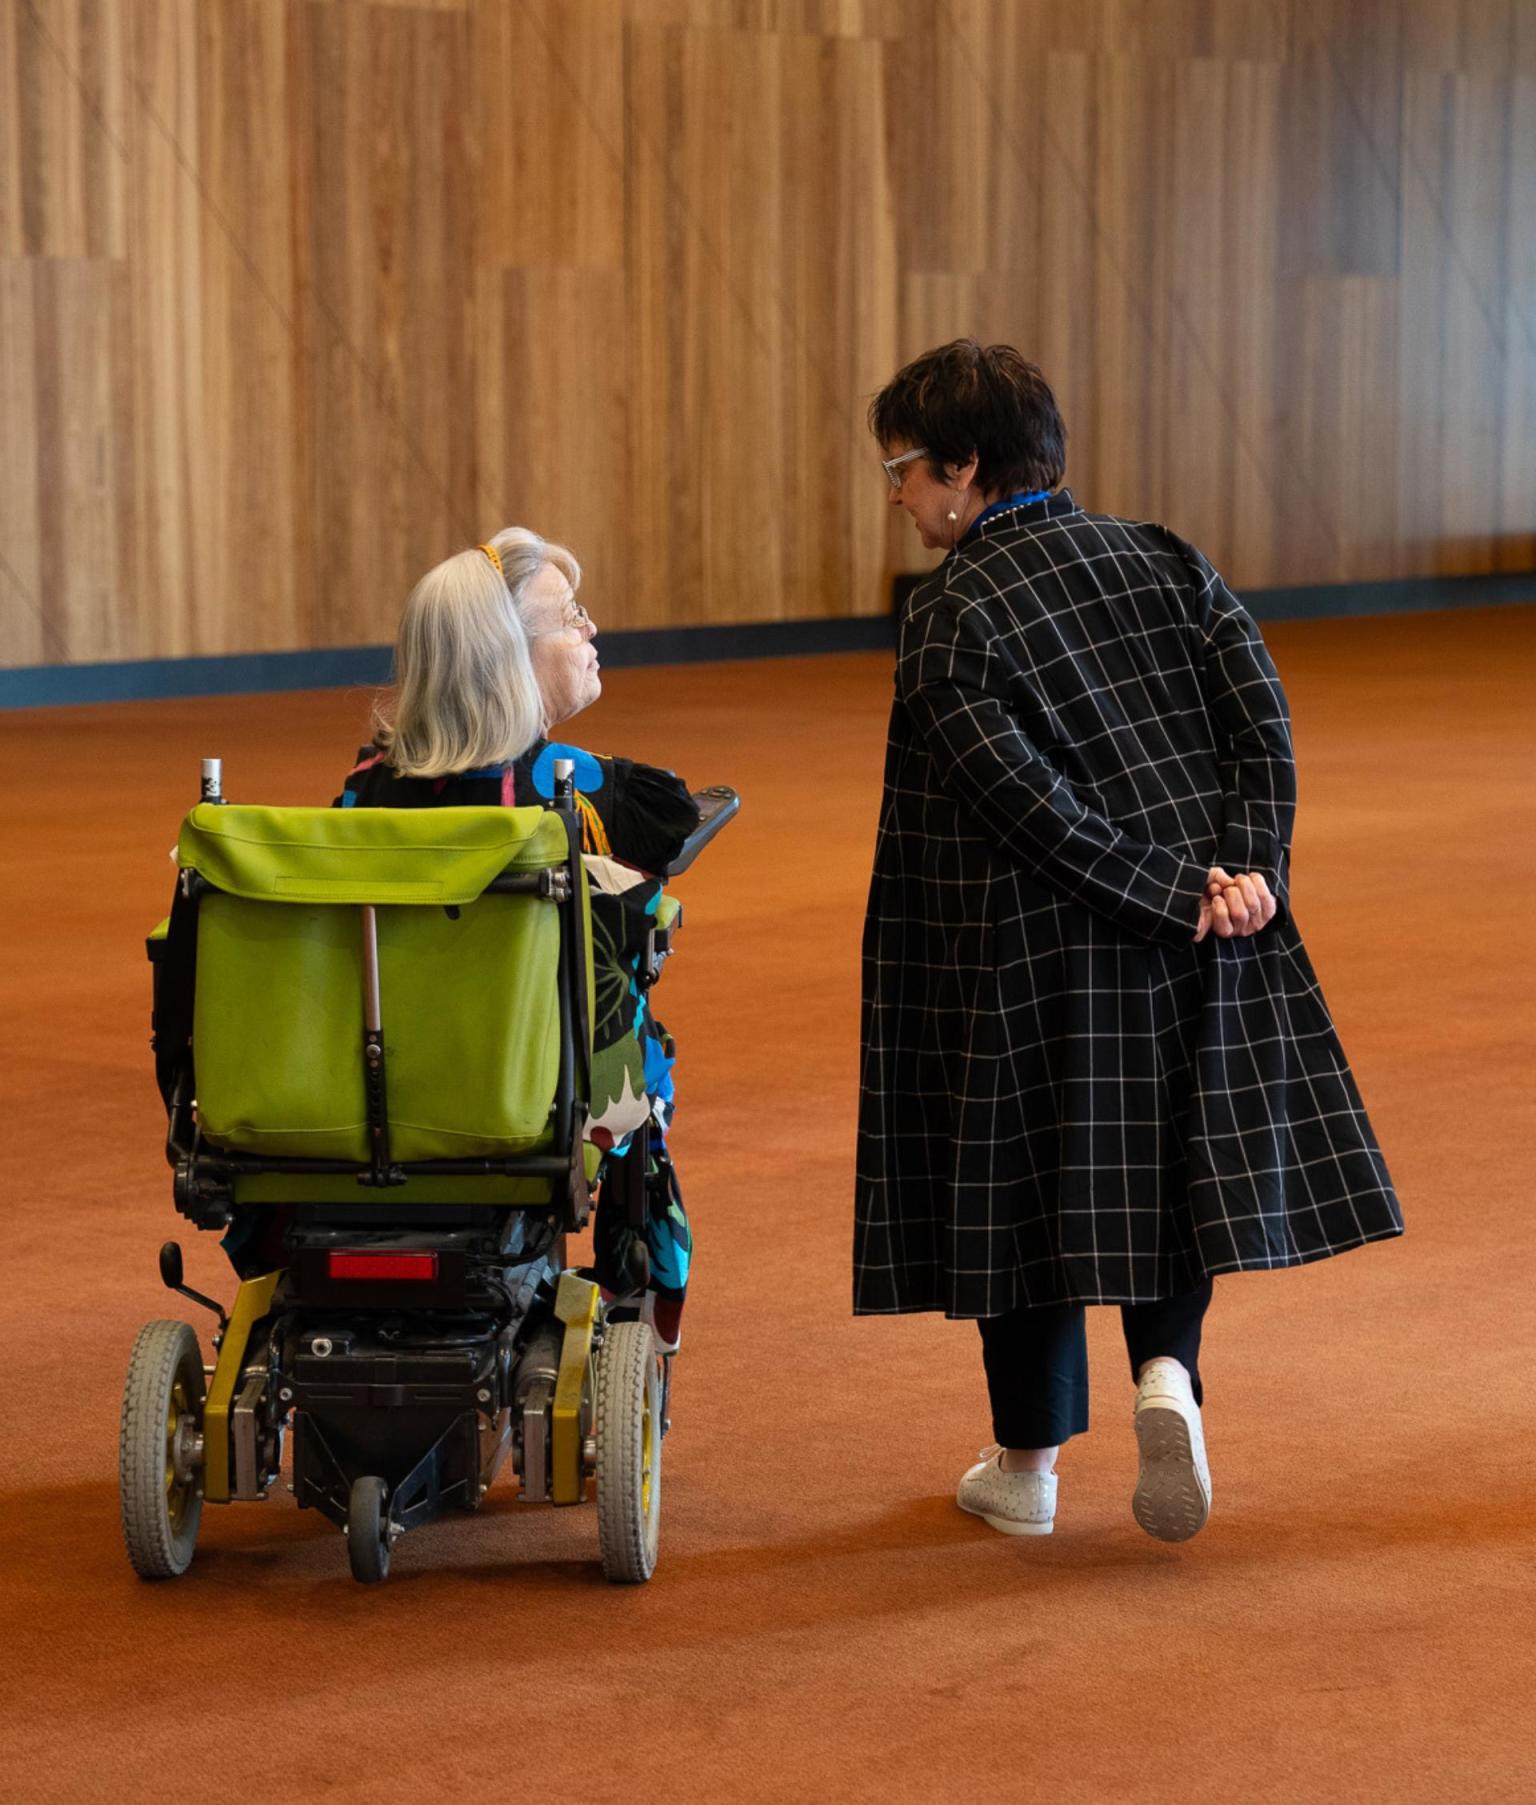 Two woman talking in a hallway with orange carpet. One women walks to the side while the other is in a motorised wheelchair.